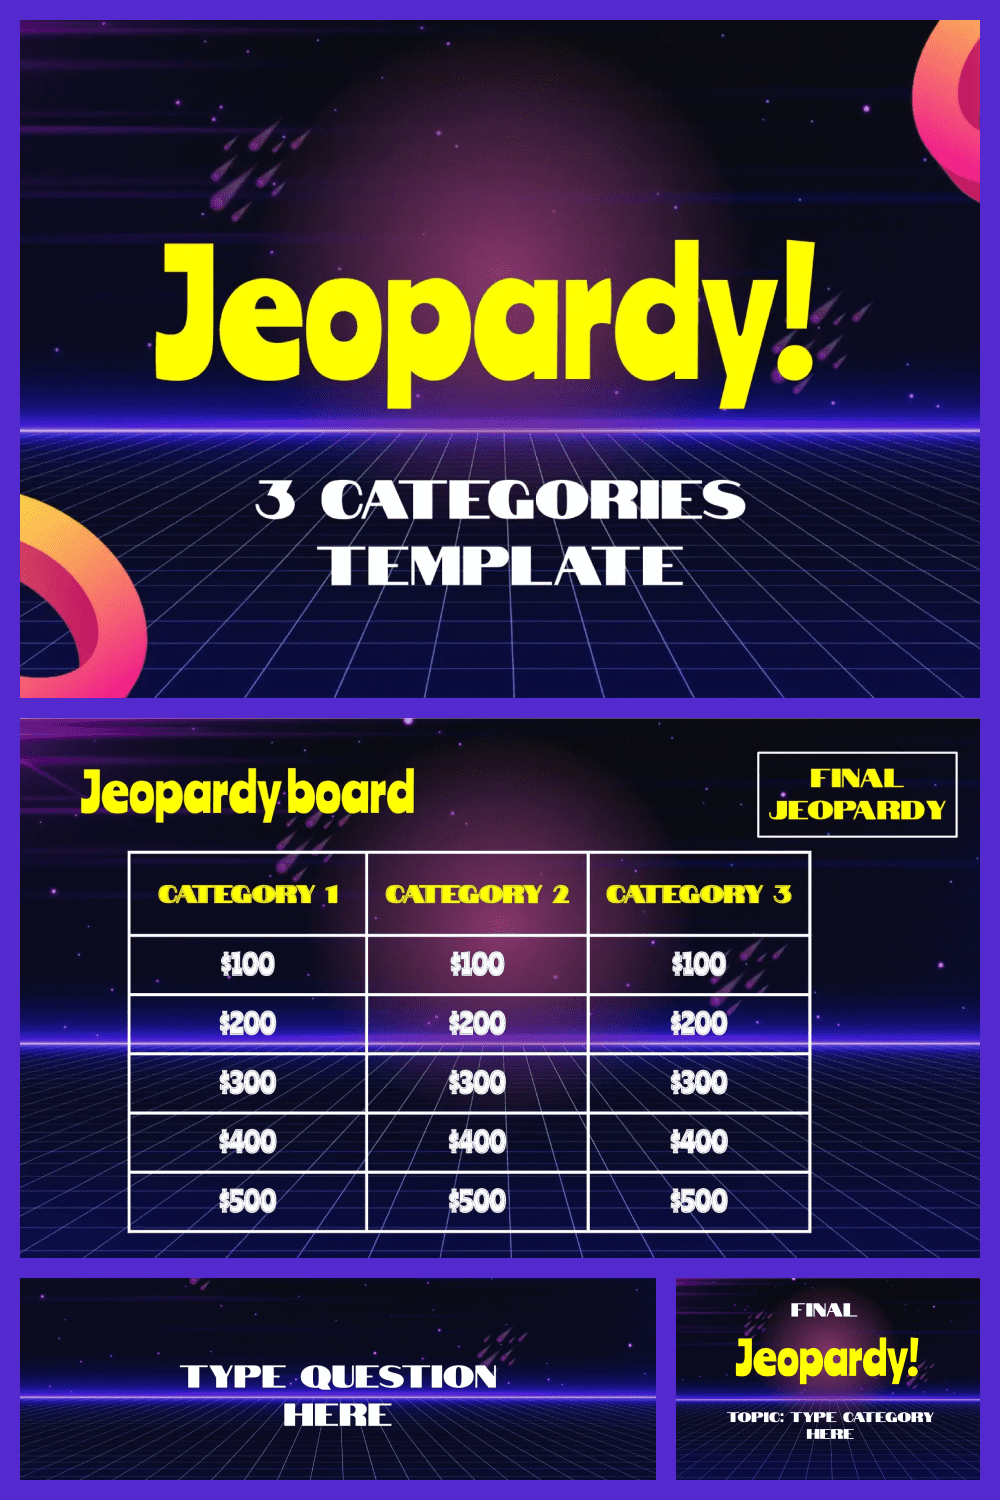 Jeopardy game template with dark blue background.